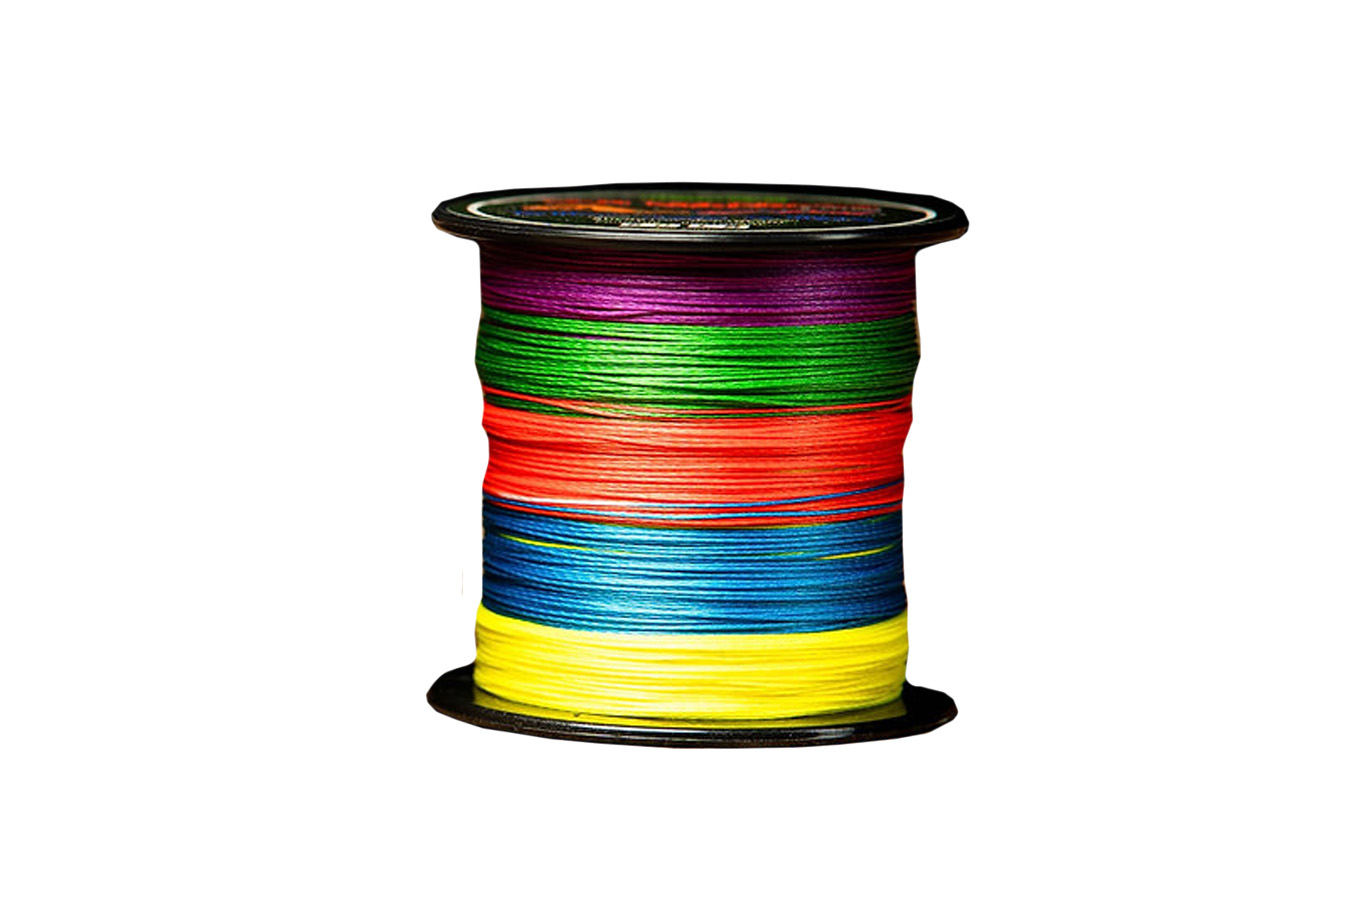 Discount Madkatz Multi-Color 9 Strand Braid Fishing Line 80lb for Sale, Online Fishing Store